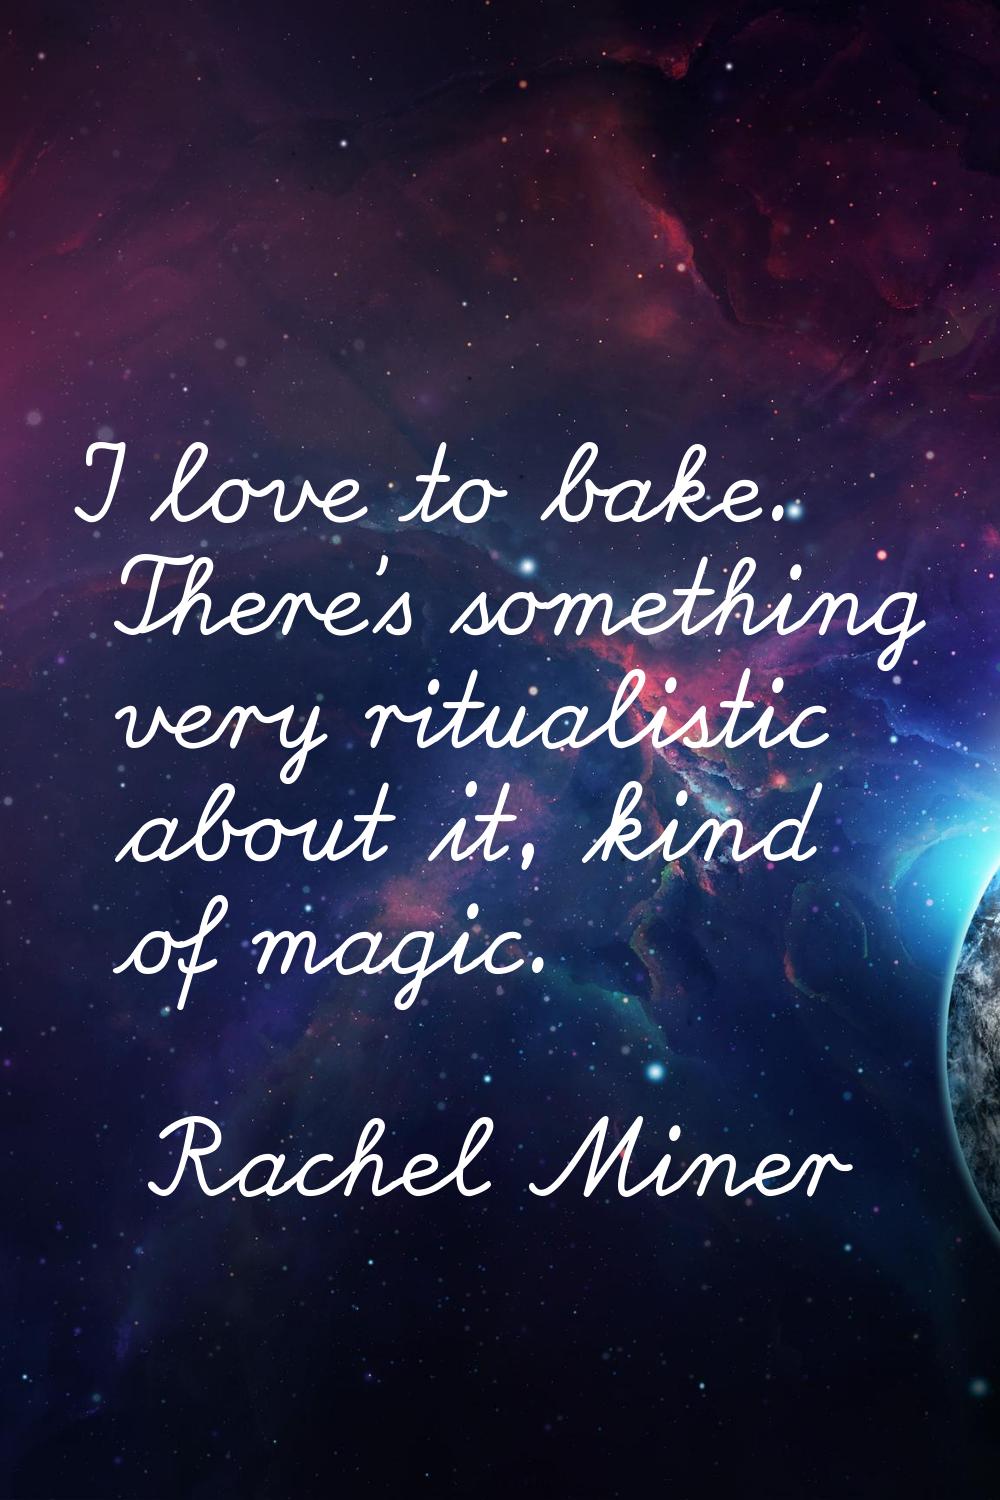 I love to bake. There's something very ritualistic about it, kind of magic.